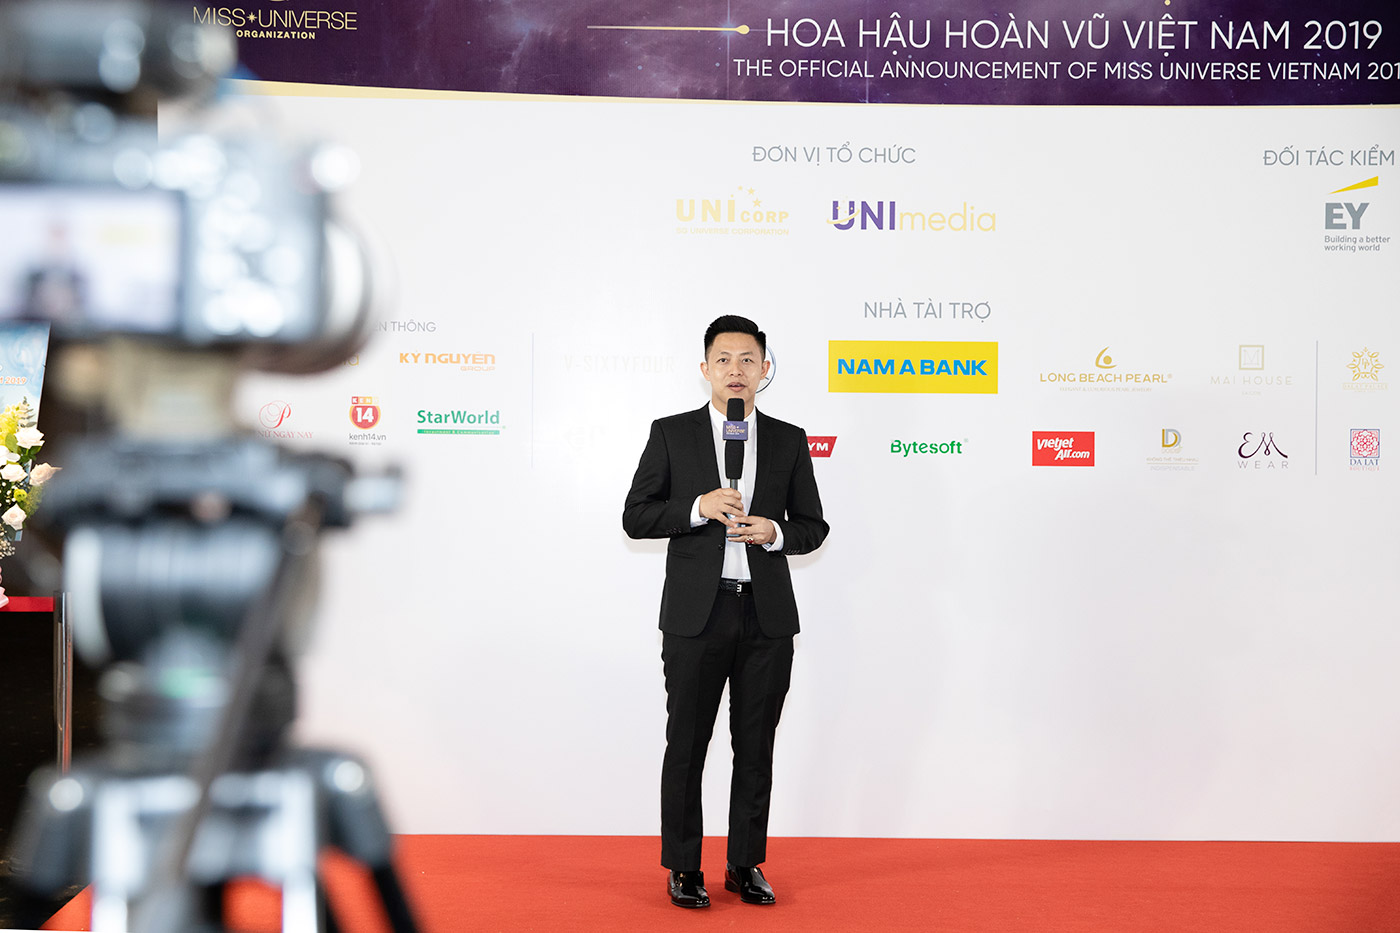 Interview with the representative of BVote - The voting system of Miss Universe Vietnam 2019